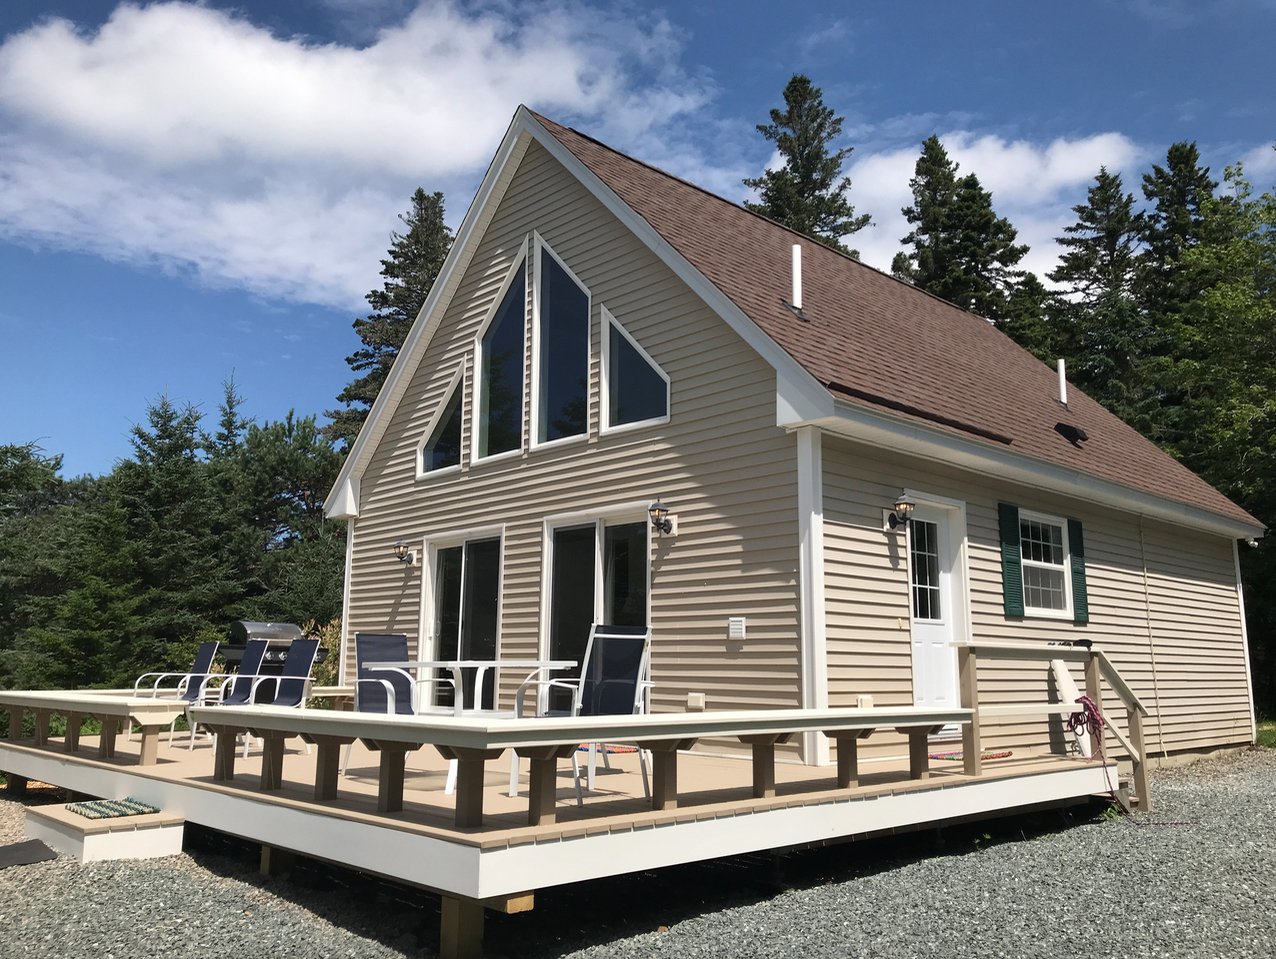 41 Anns Point Road Bass Harbor Maine Deck and Cottage.jpg